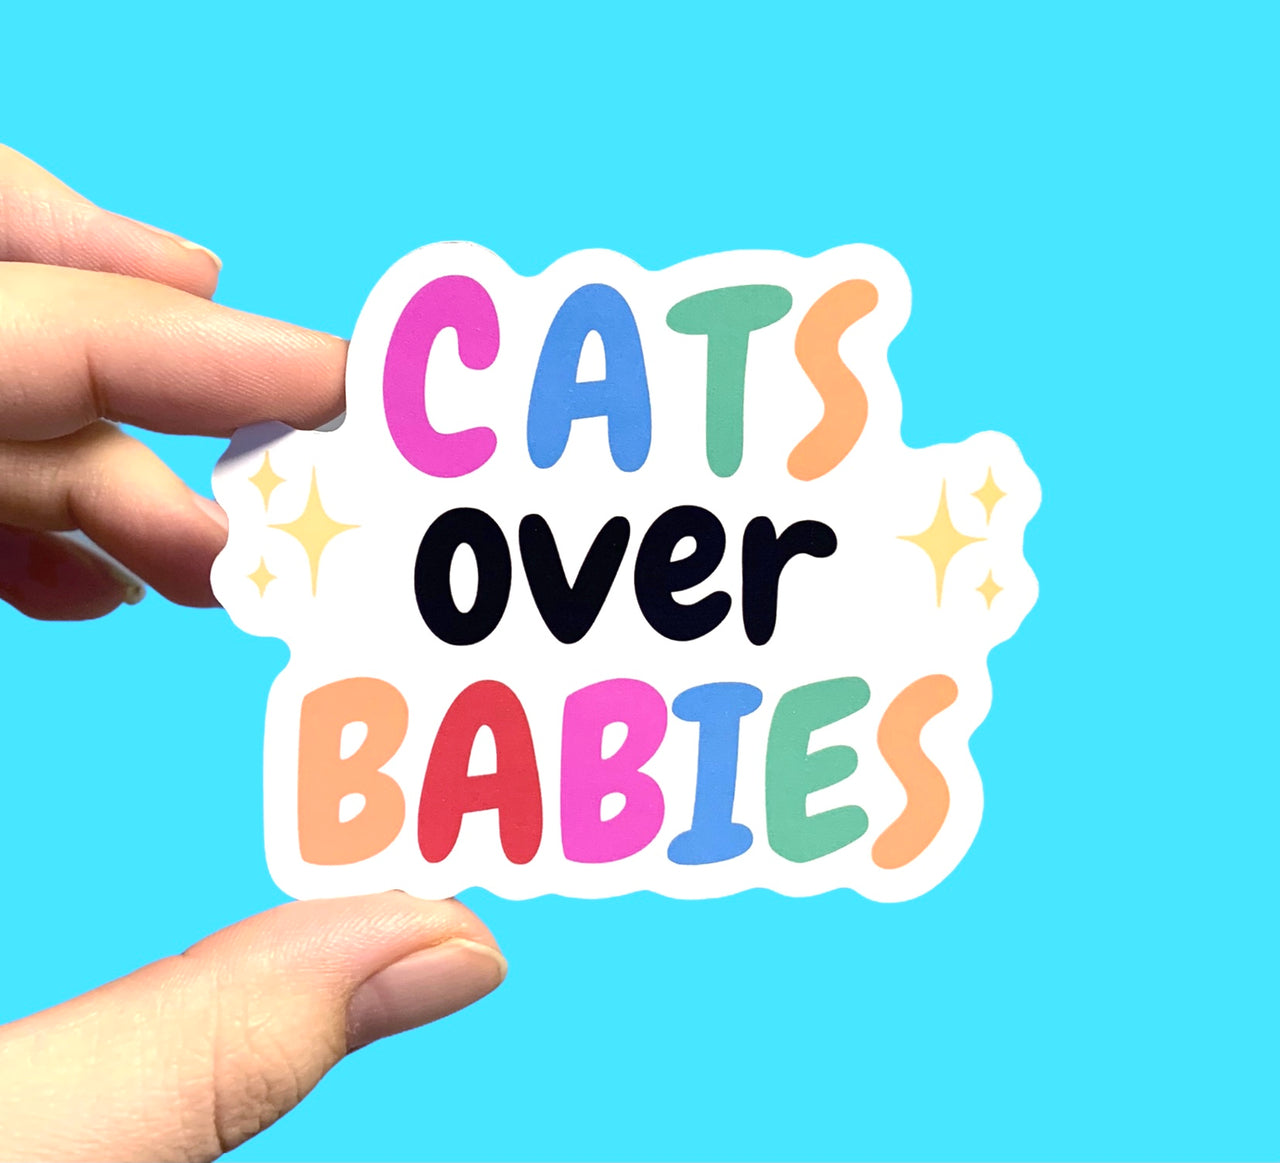 Cats over babies (pack of 3 or 5 stickers)